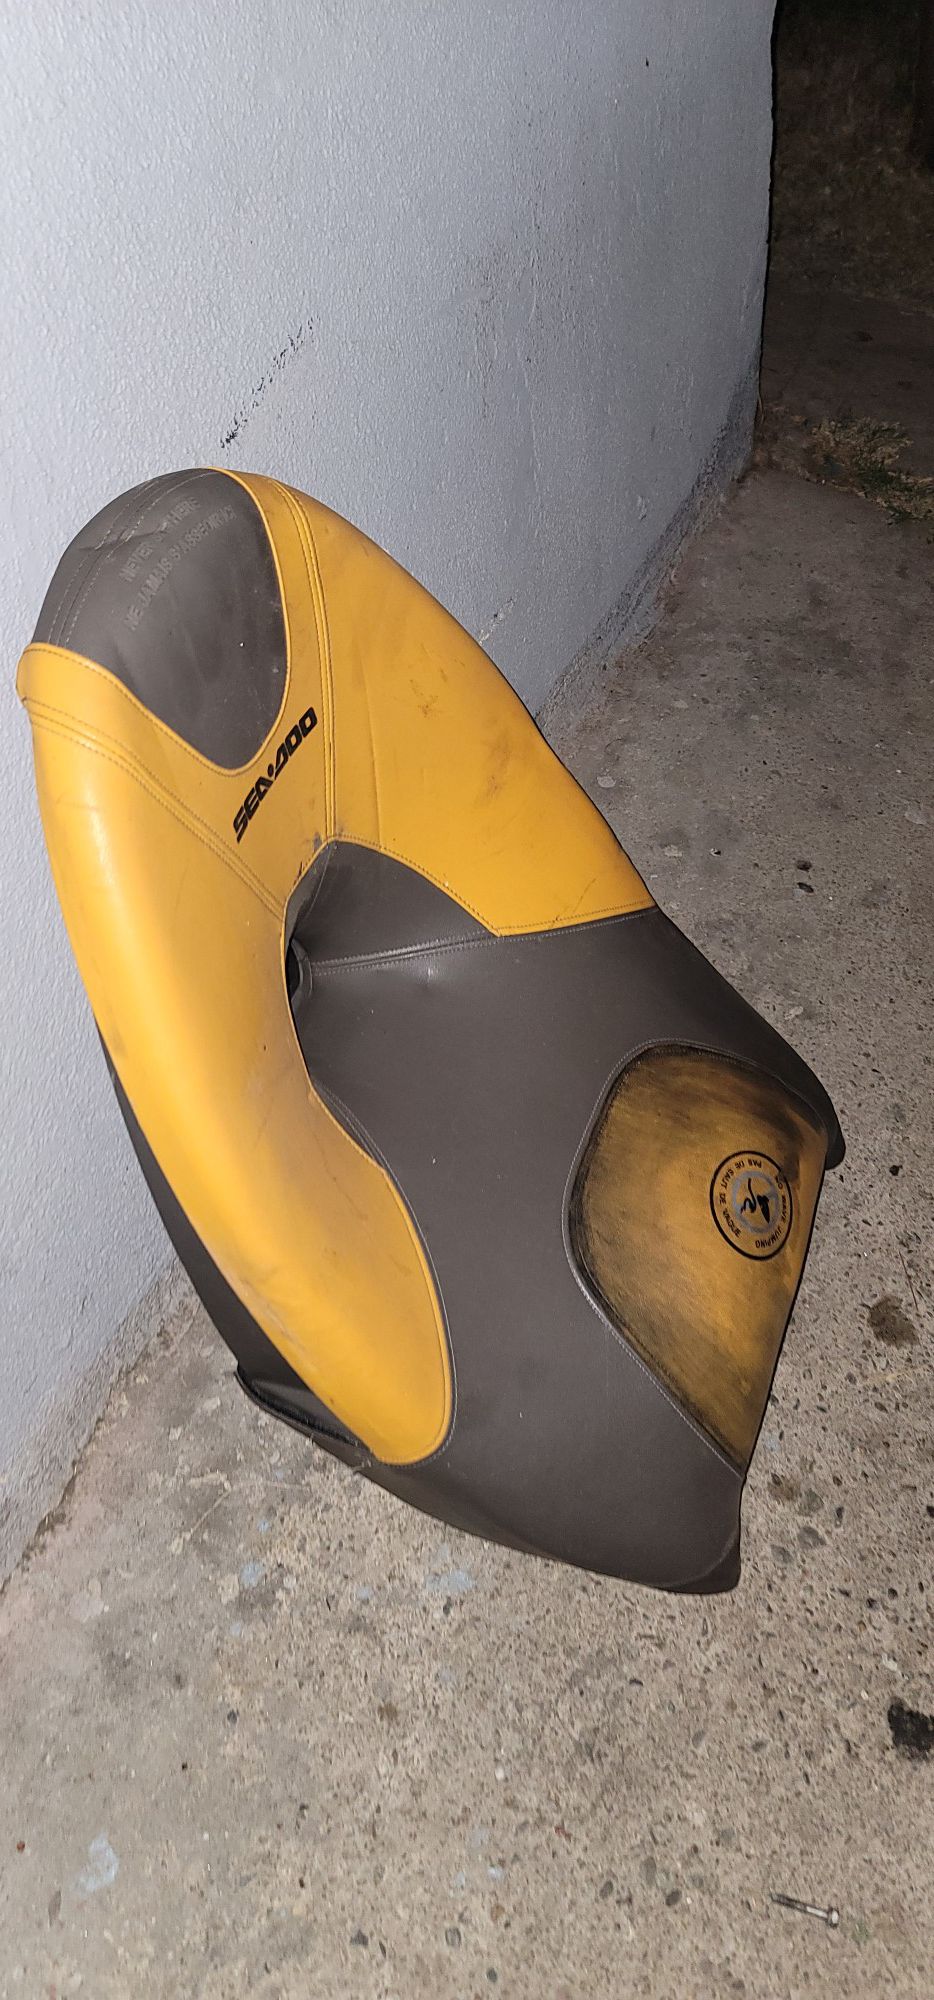 Photo Seadoo 3D car mode seat hard to find in good condition